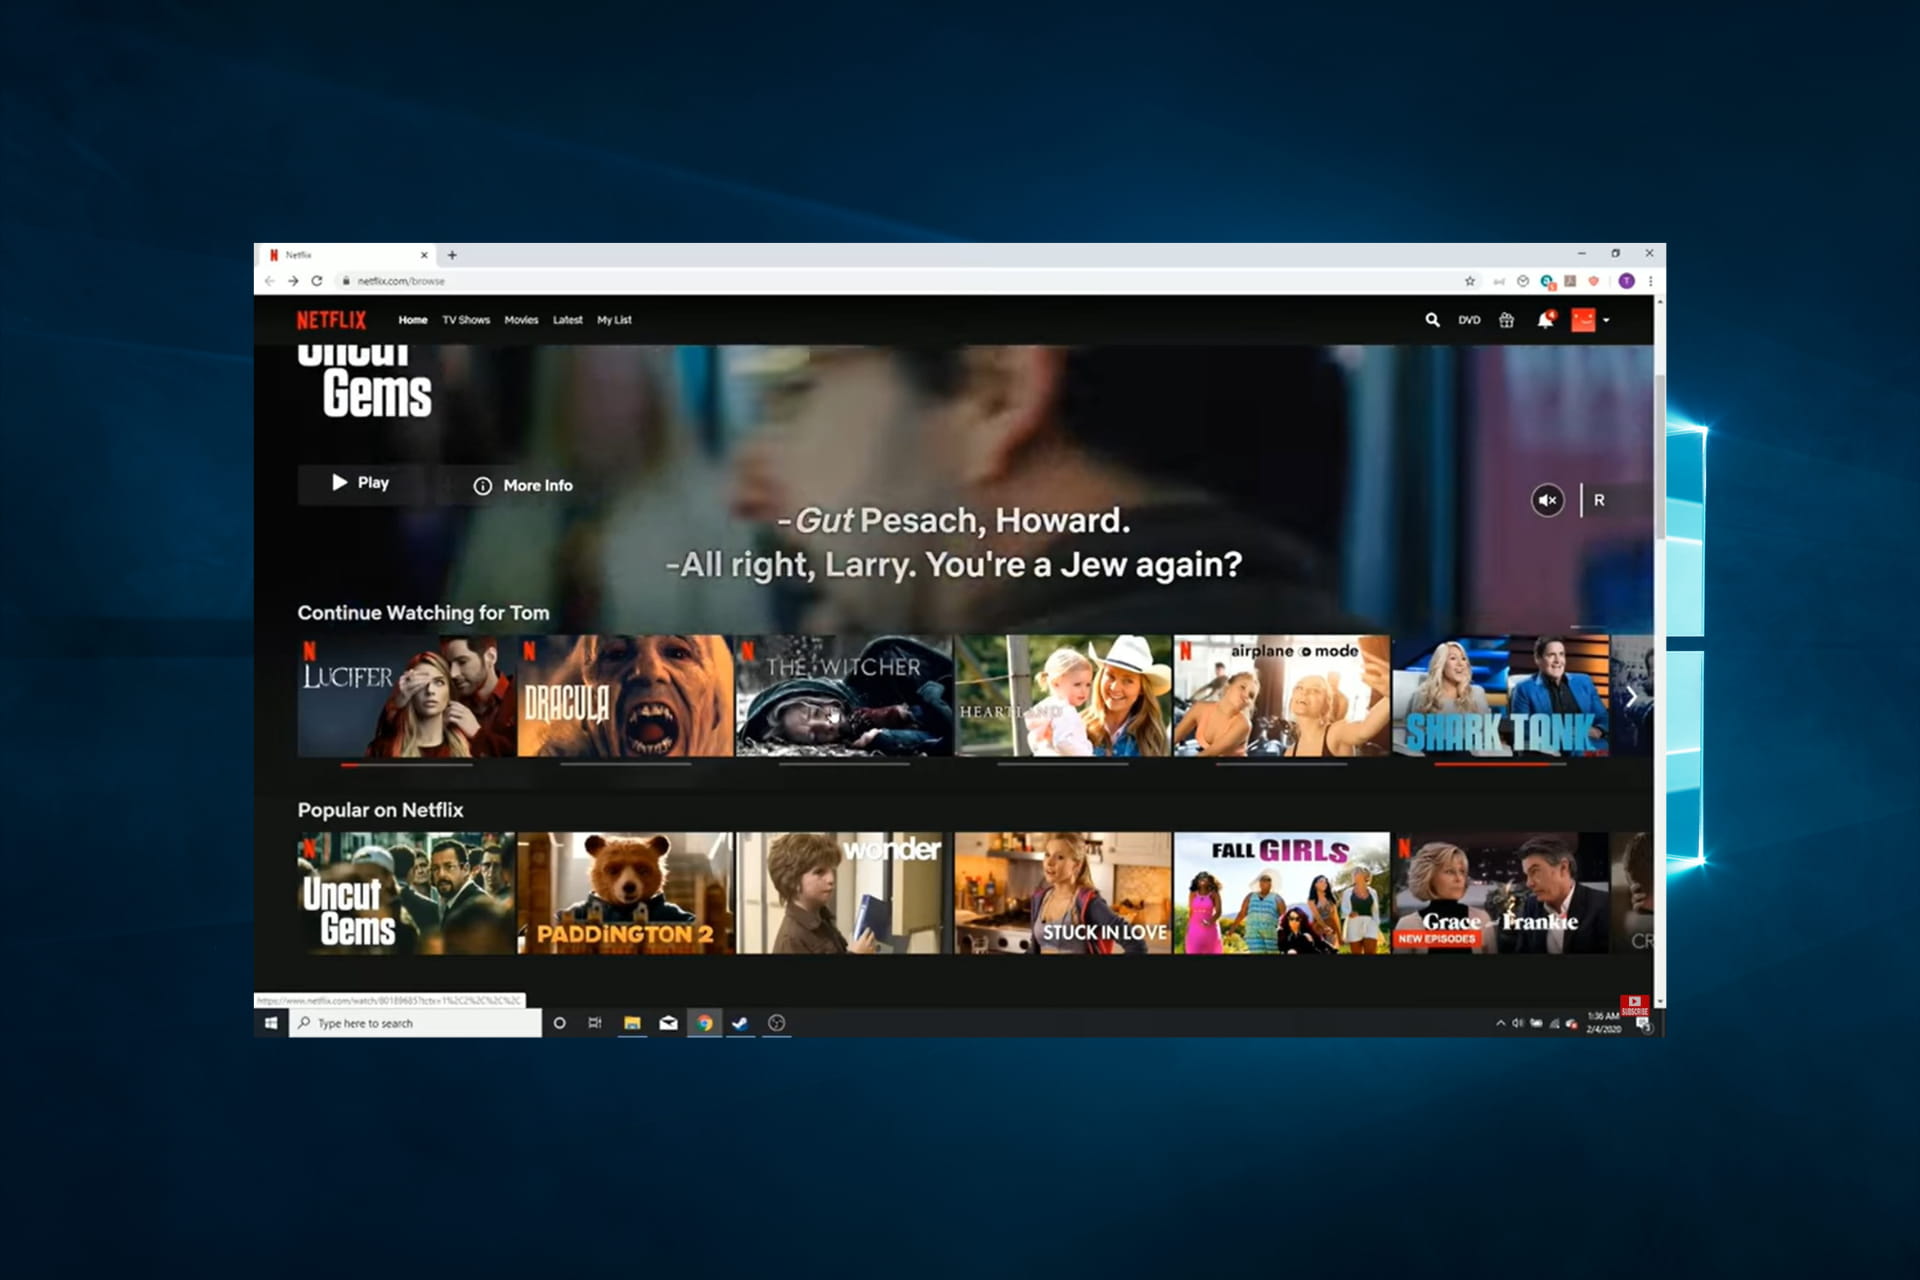 Netflix Low Quality on Chrome: Improve it With These 4 Fixes